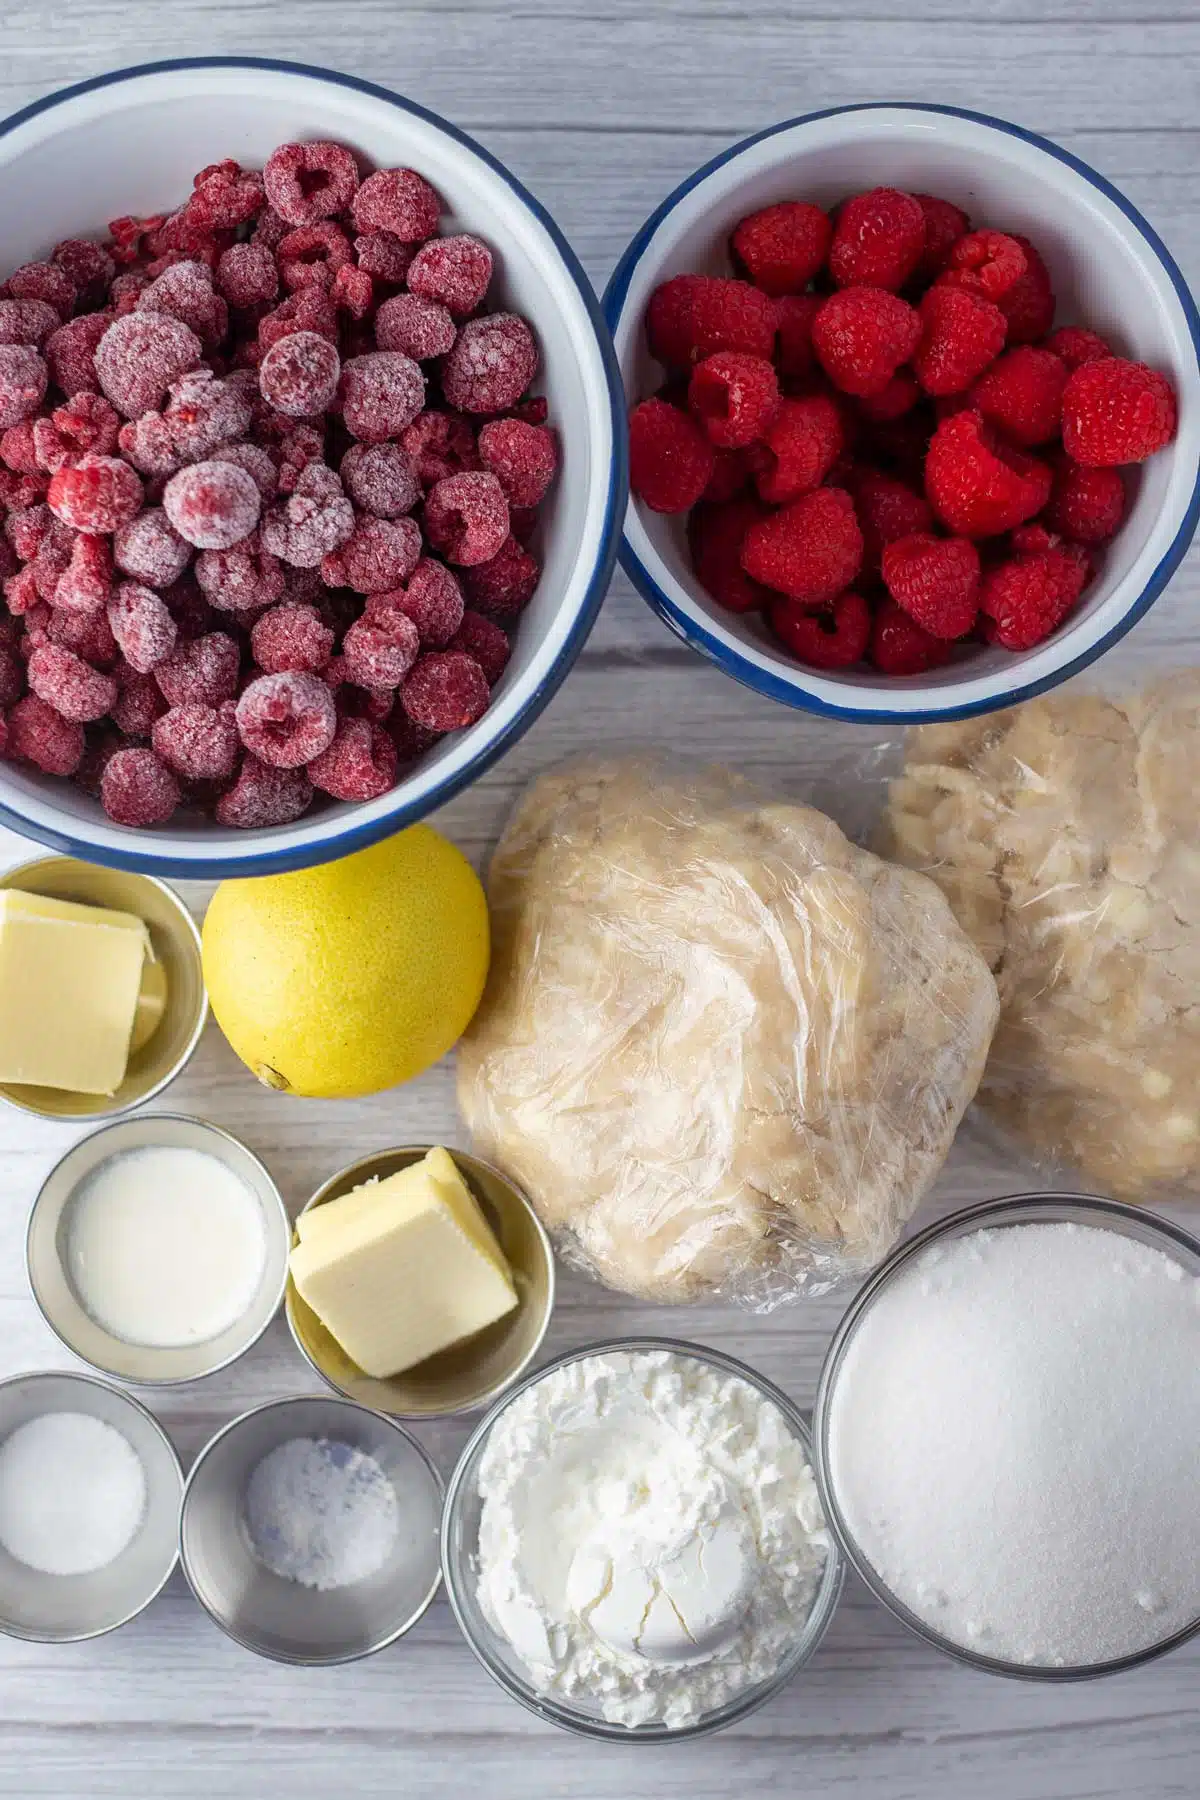 Tall image showing raspberry pie ingredients.